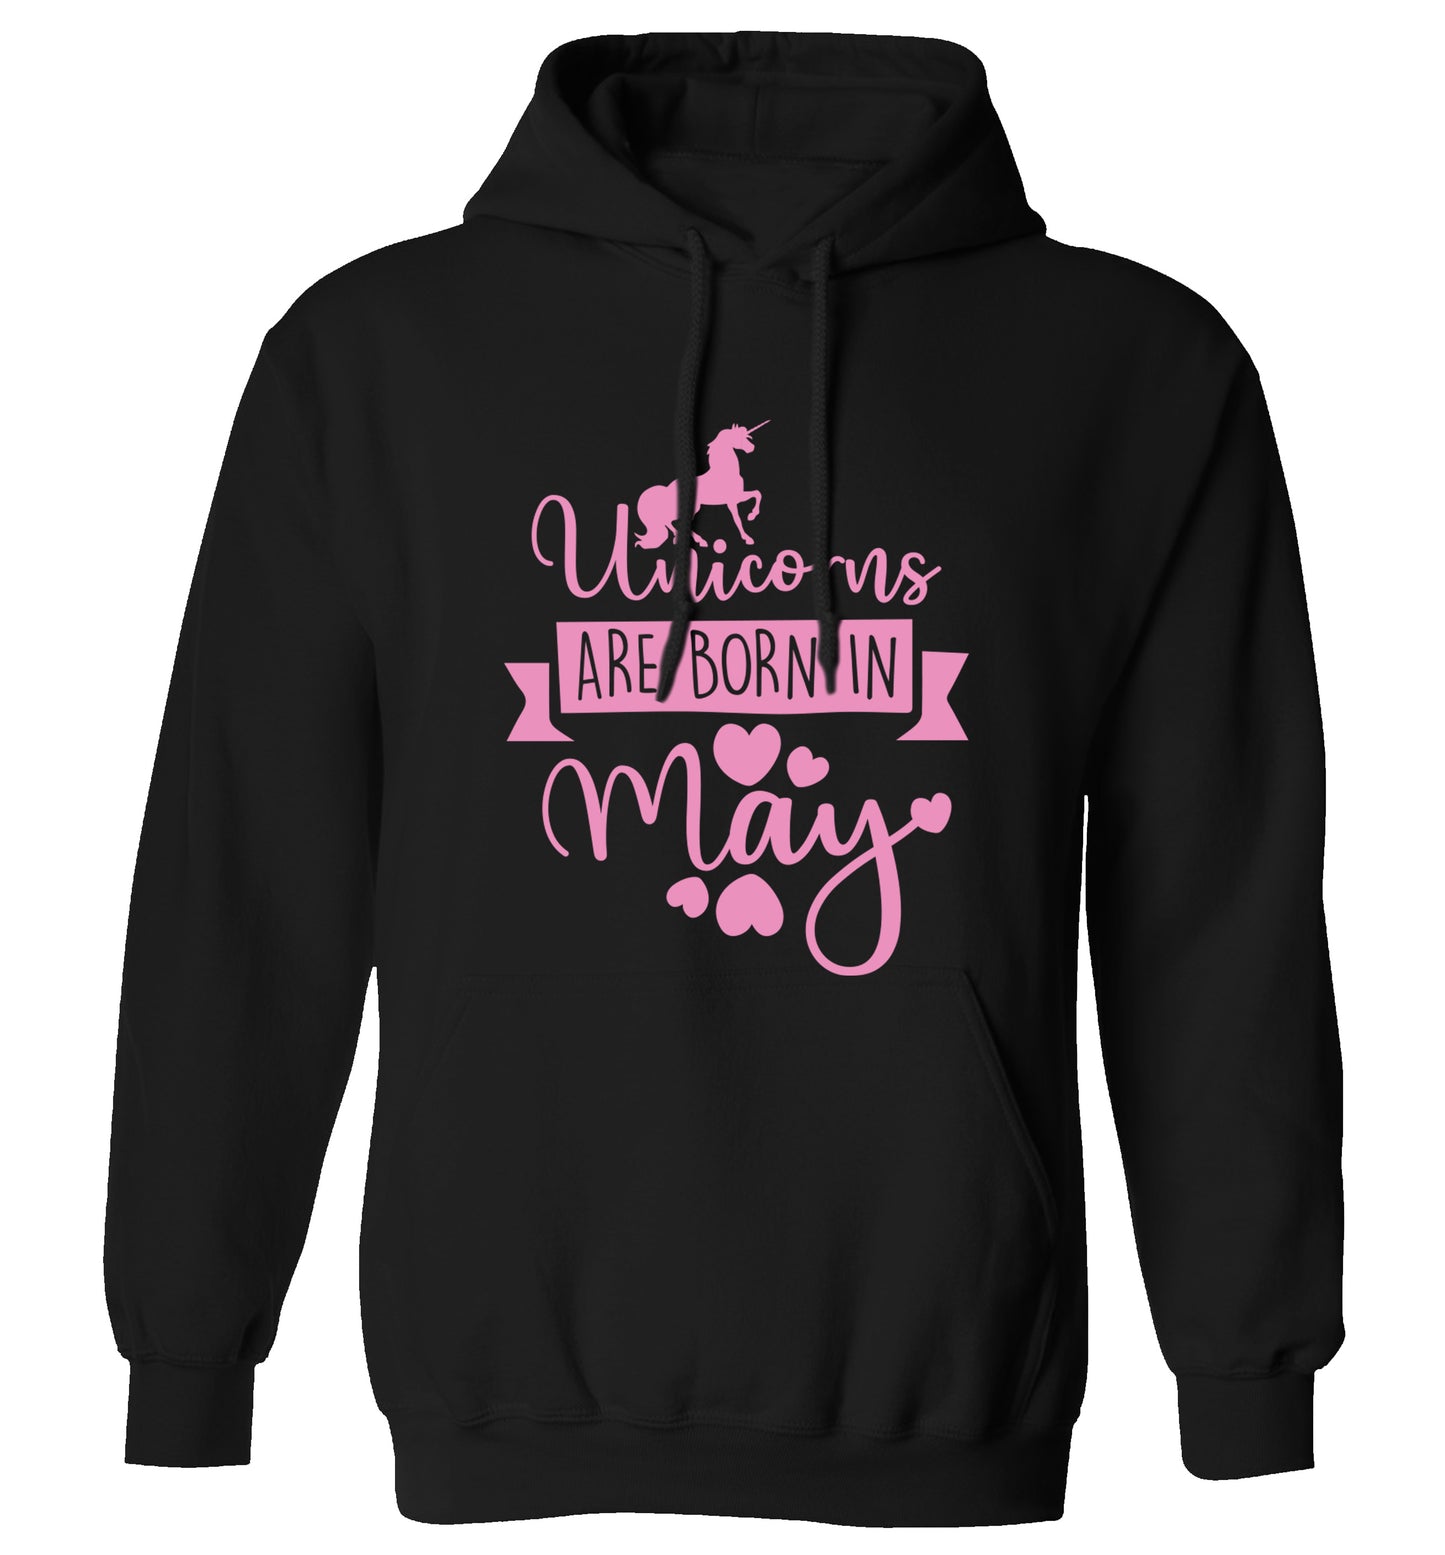 Unicorns are born in May adults unisex black hoodie 2XL